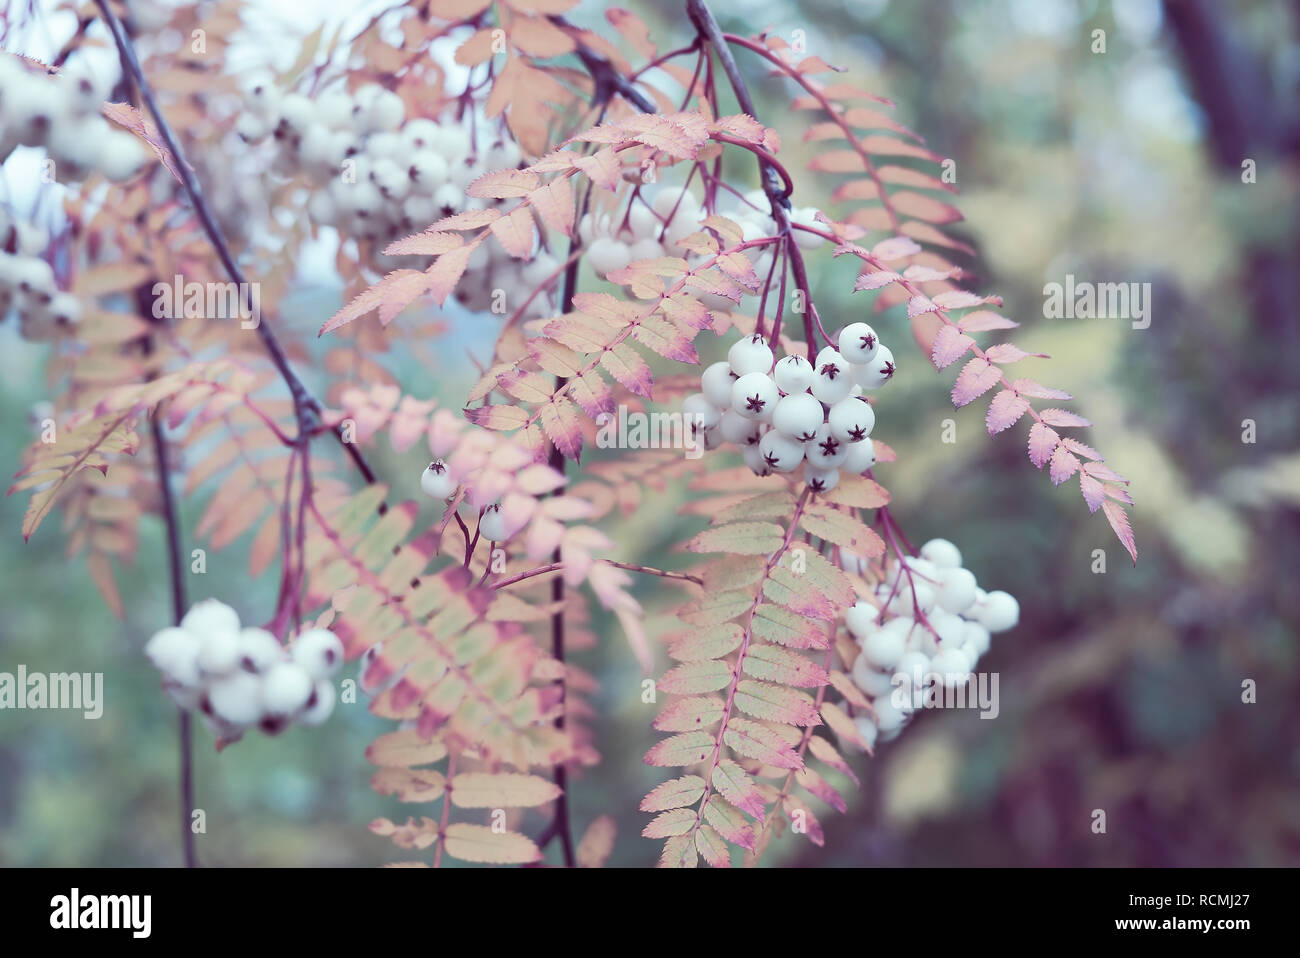 Autumnal detail of a wild Chinese Rowan tree branch with mountain ash leaves and white sorbus berries in a feminine soft pink color tone Stock Photo